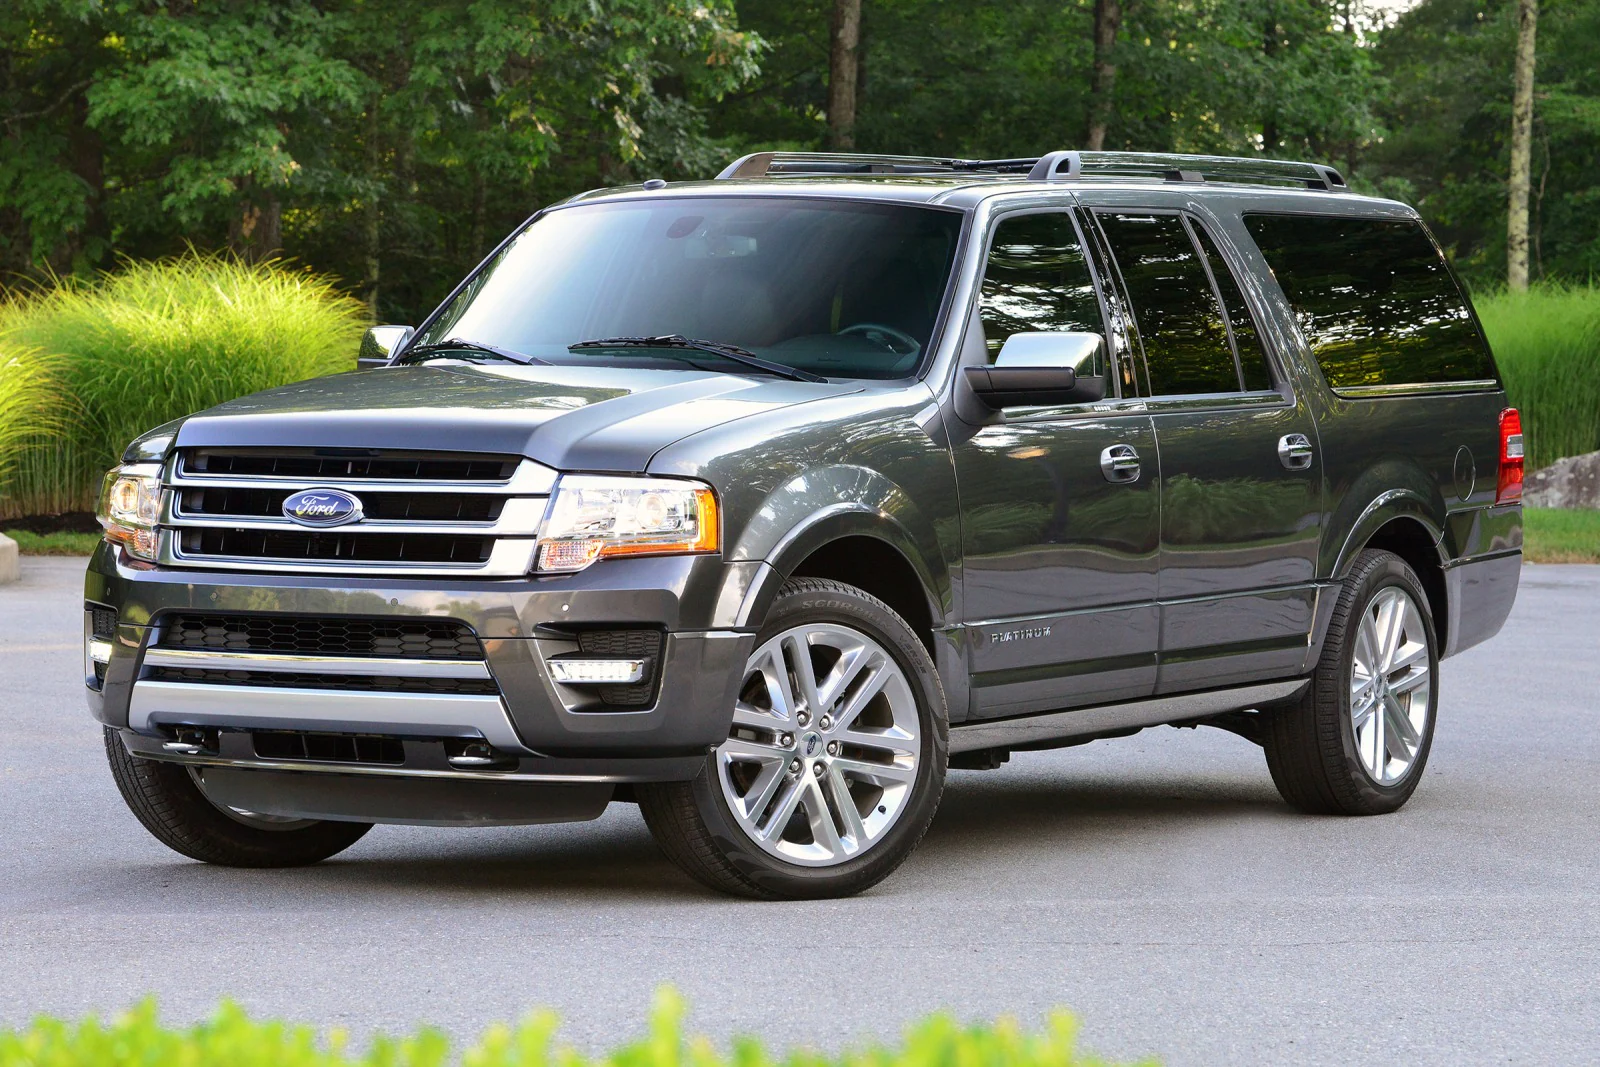 Don’t Skip Service! 2017 Ford Expedition Maintenance Schedule